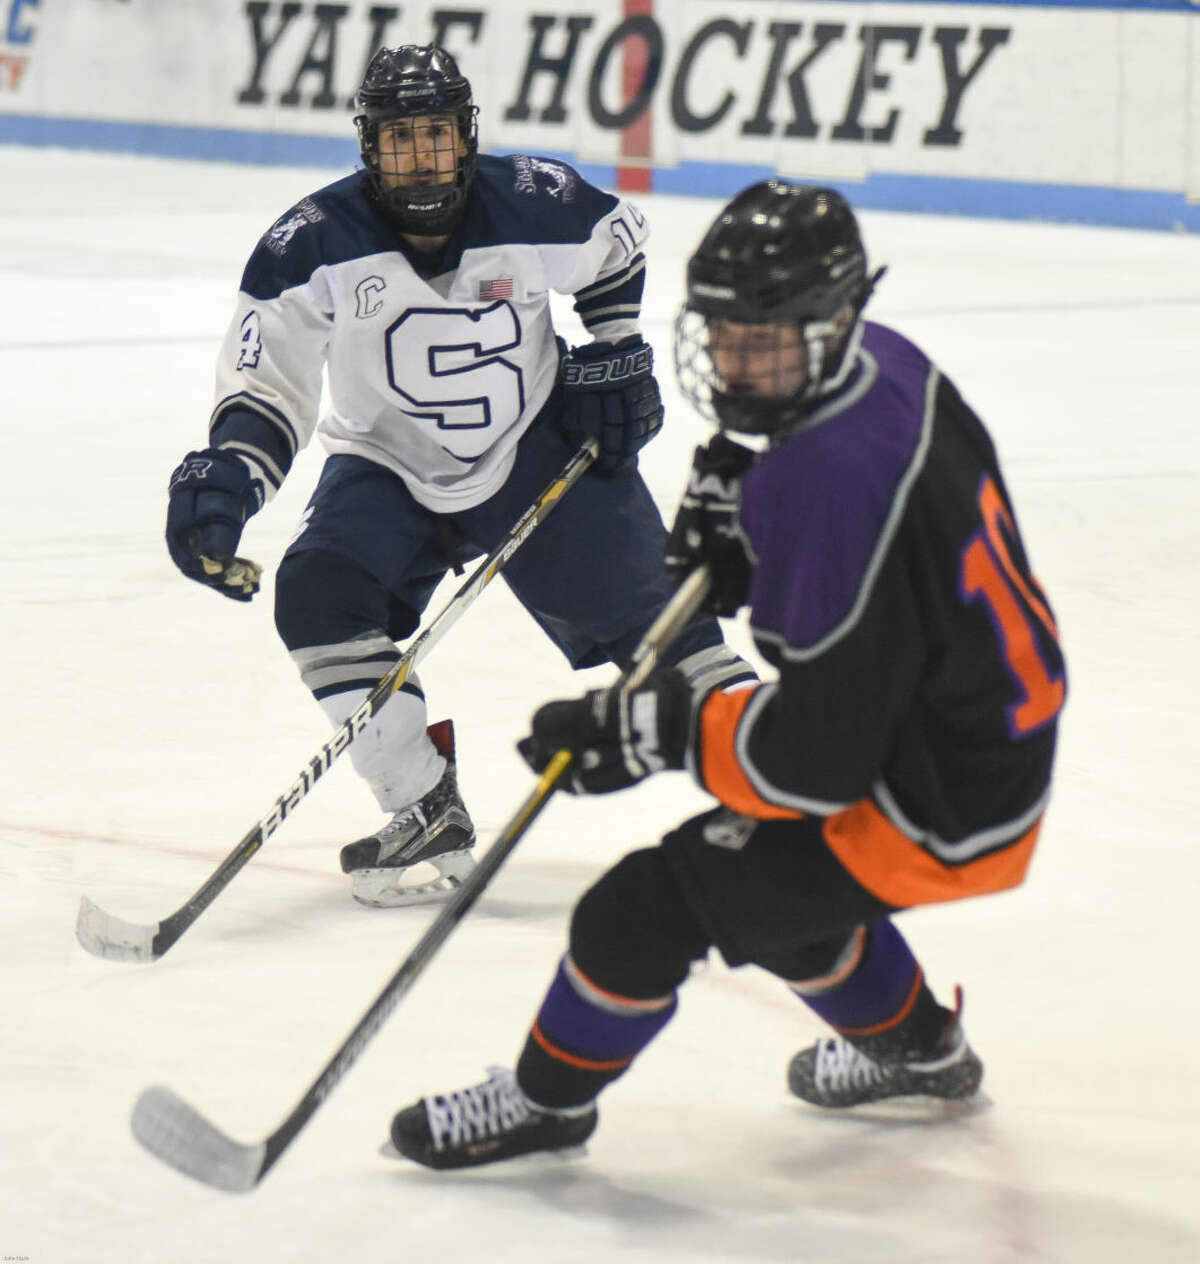 Hour photo/John Nash - The Westhill-Stamford co-op defeated Staples-Weston-Shelton by a 5-4 score on Saturday at Yale University's Ingalls Rink to win the CIAC Division 3 state championship.